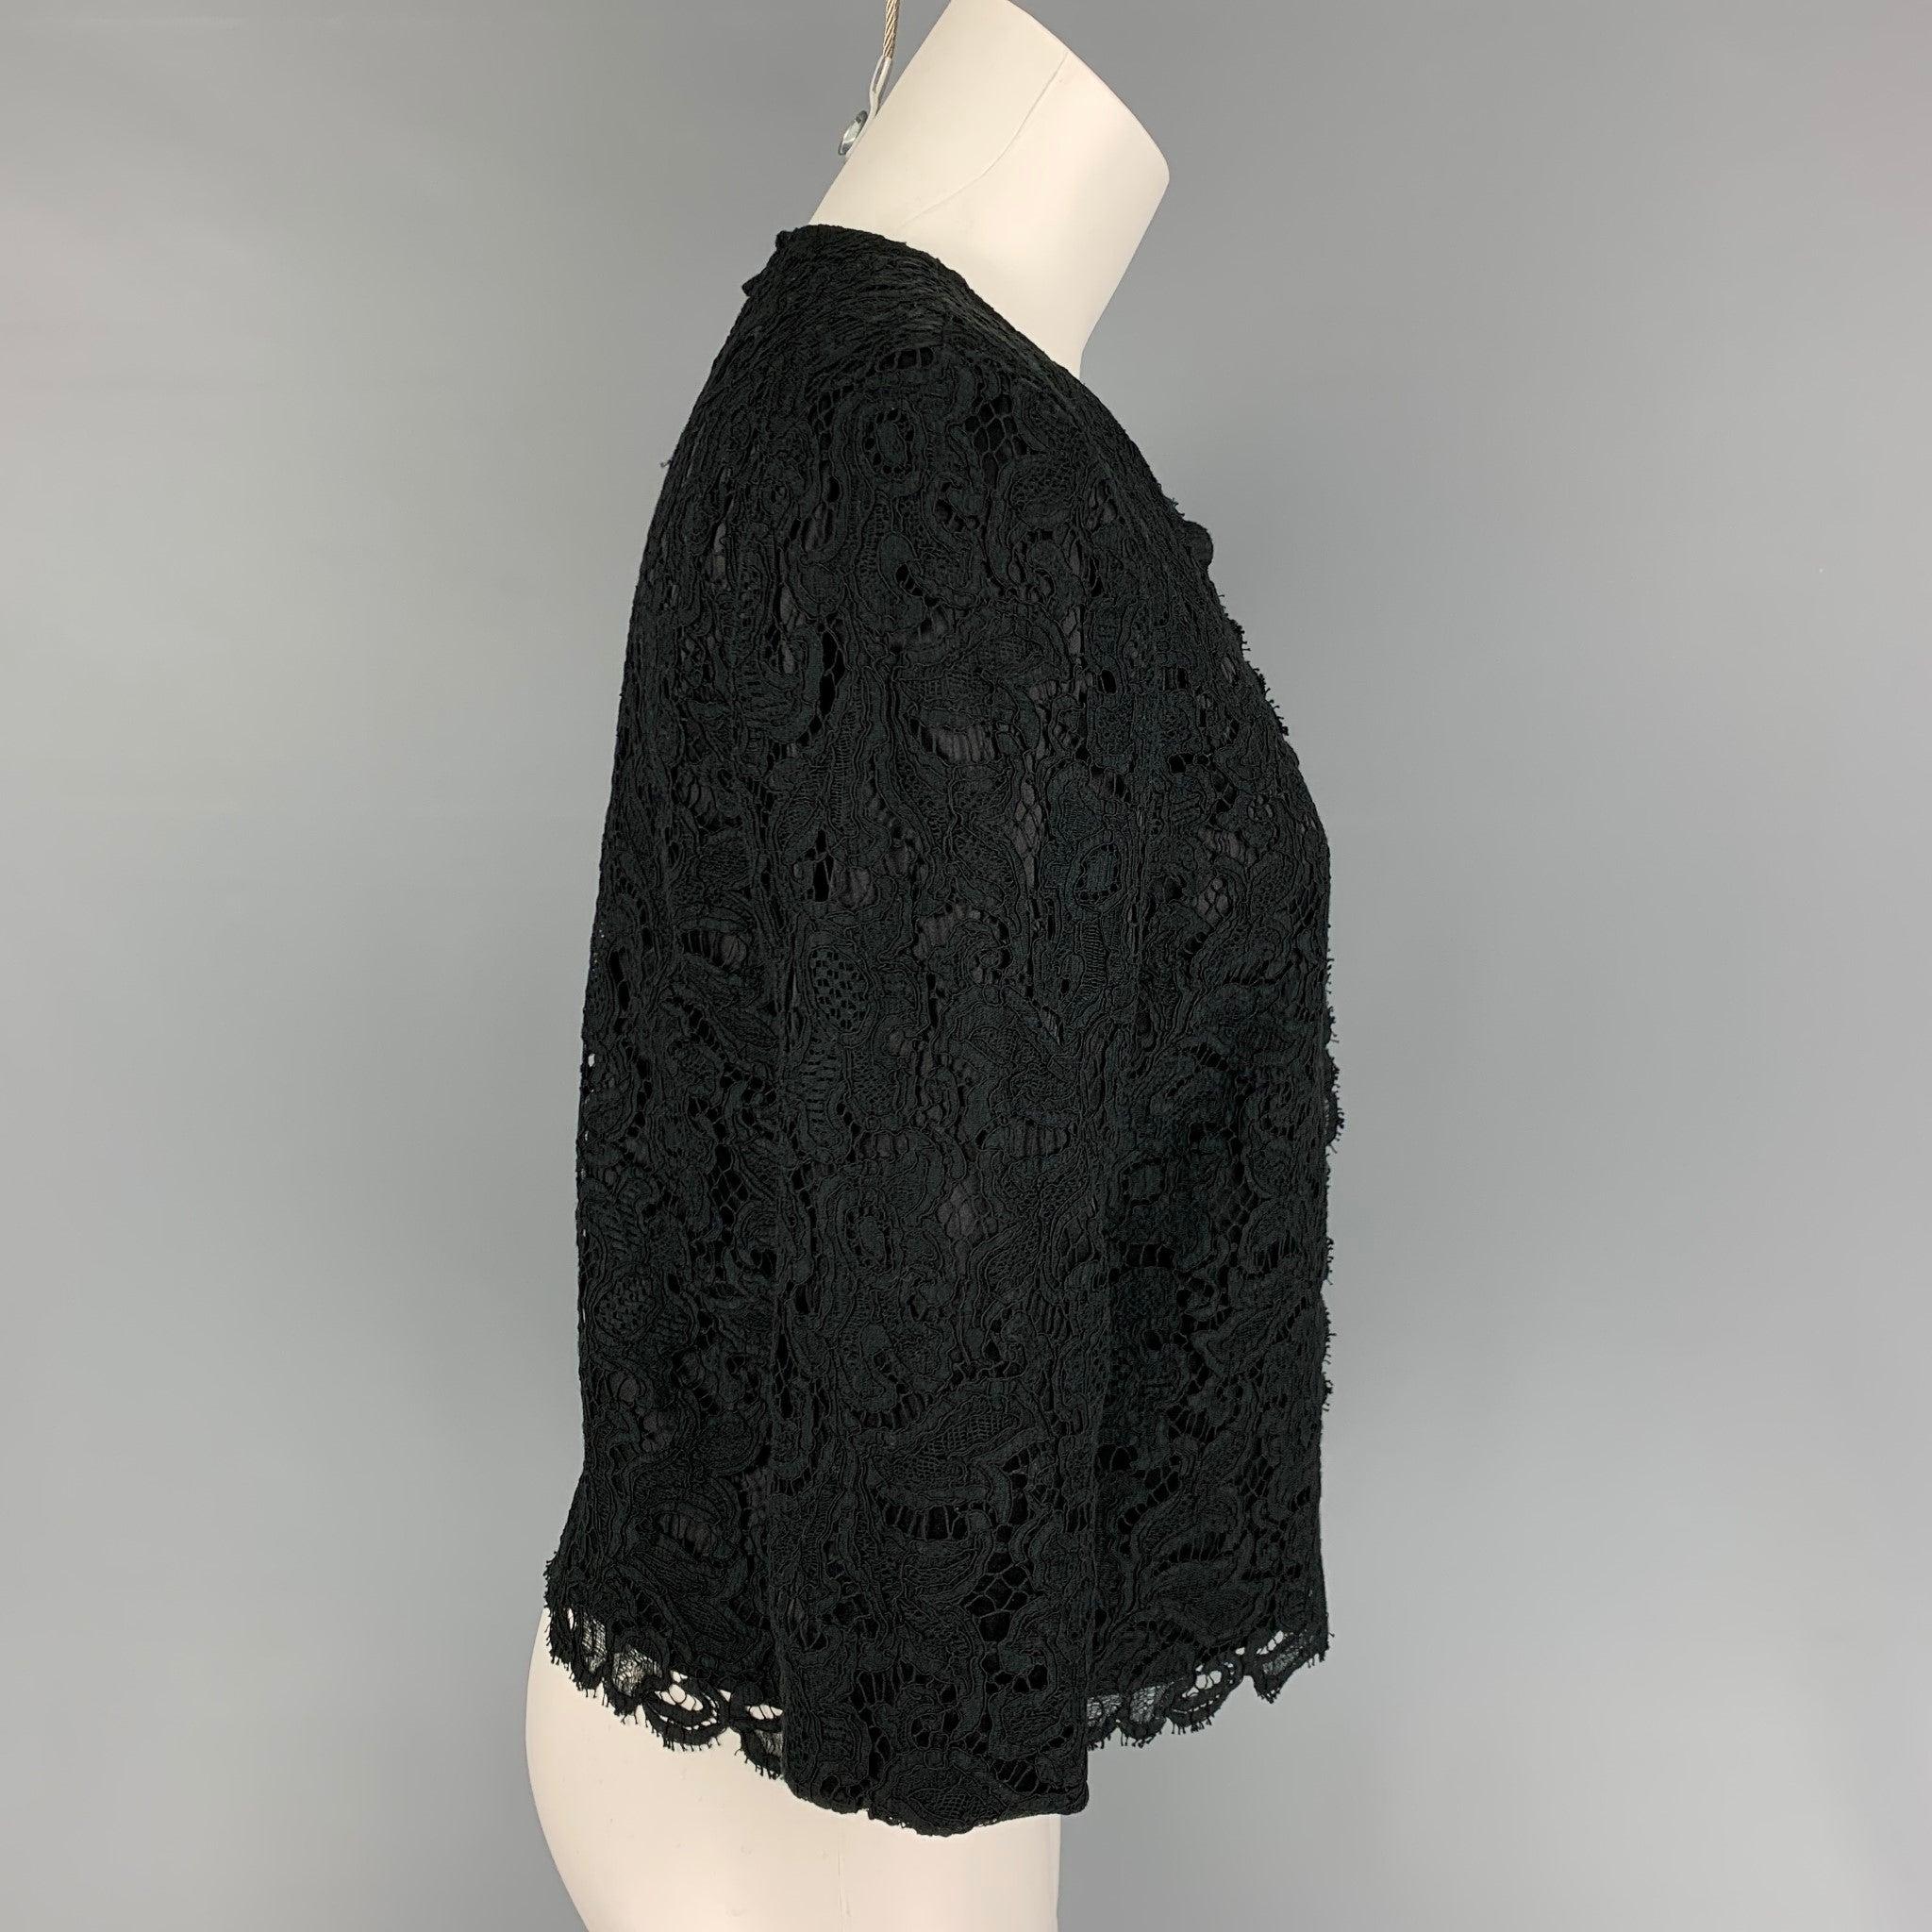 BLACK FLEECE jacket comes in a black lace cotton blend featuring a cropped style and a buttoned closure.
Very Good
Pre-Owned Condition. 

Marked:   BB2 

Measurements: 
 
Shoulder: 15 inches  Bust: 34 inches  Sleeve: 16.5 inches  Length: 20 inches 
